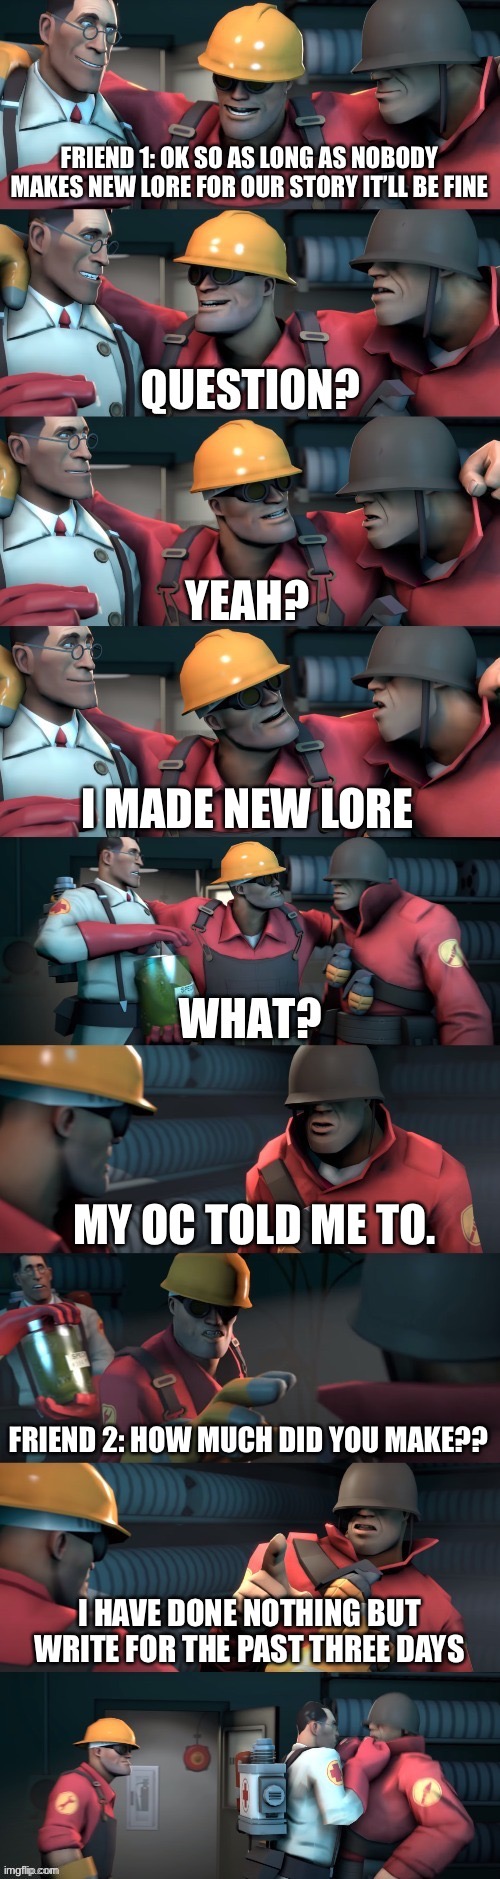 heh | FRIEND 1: OK SO AS LONG AS NOBODY MAKES NEW LORE FOR OUR STORY IT’LL BE FINE; YEAH? I MADE NEW LORE; MY OC TOLD ME TO. FRIEND 2: HOW MUCH DID YOU MAKE?? I HAVE DONE NOTHING BUT WRITE FOR THE PAST THREE DAYS | image tagged in tf2 teleport bread meme english | made w/ Imgflip meme maker